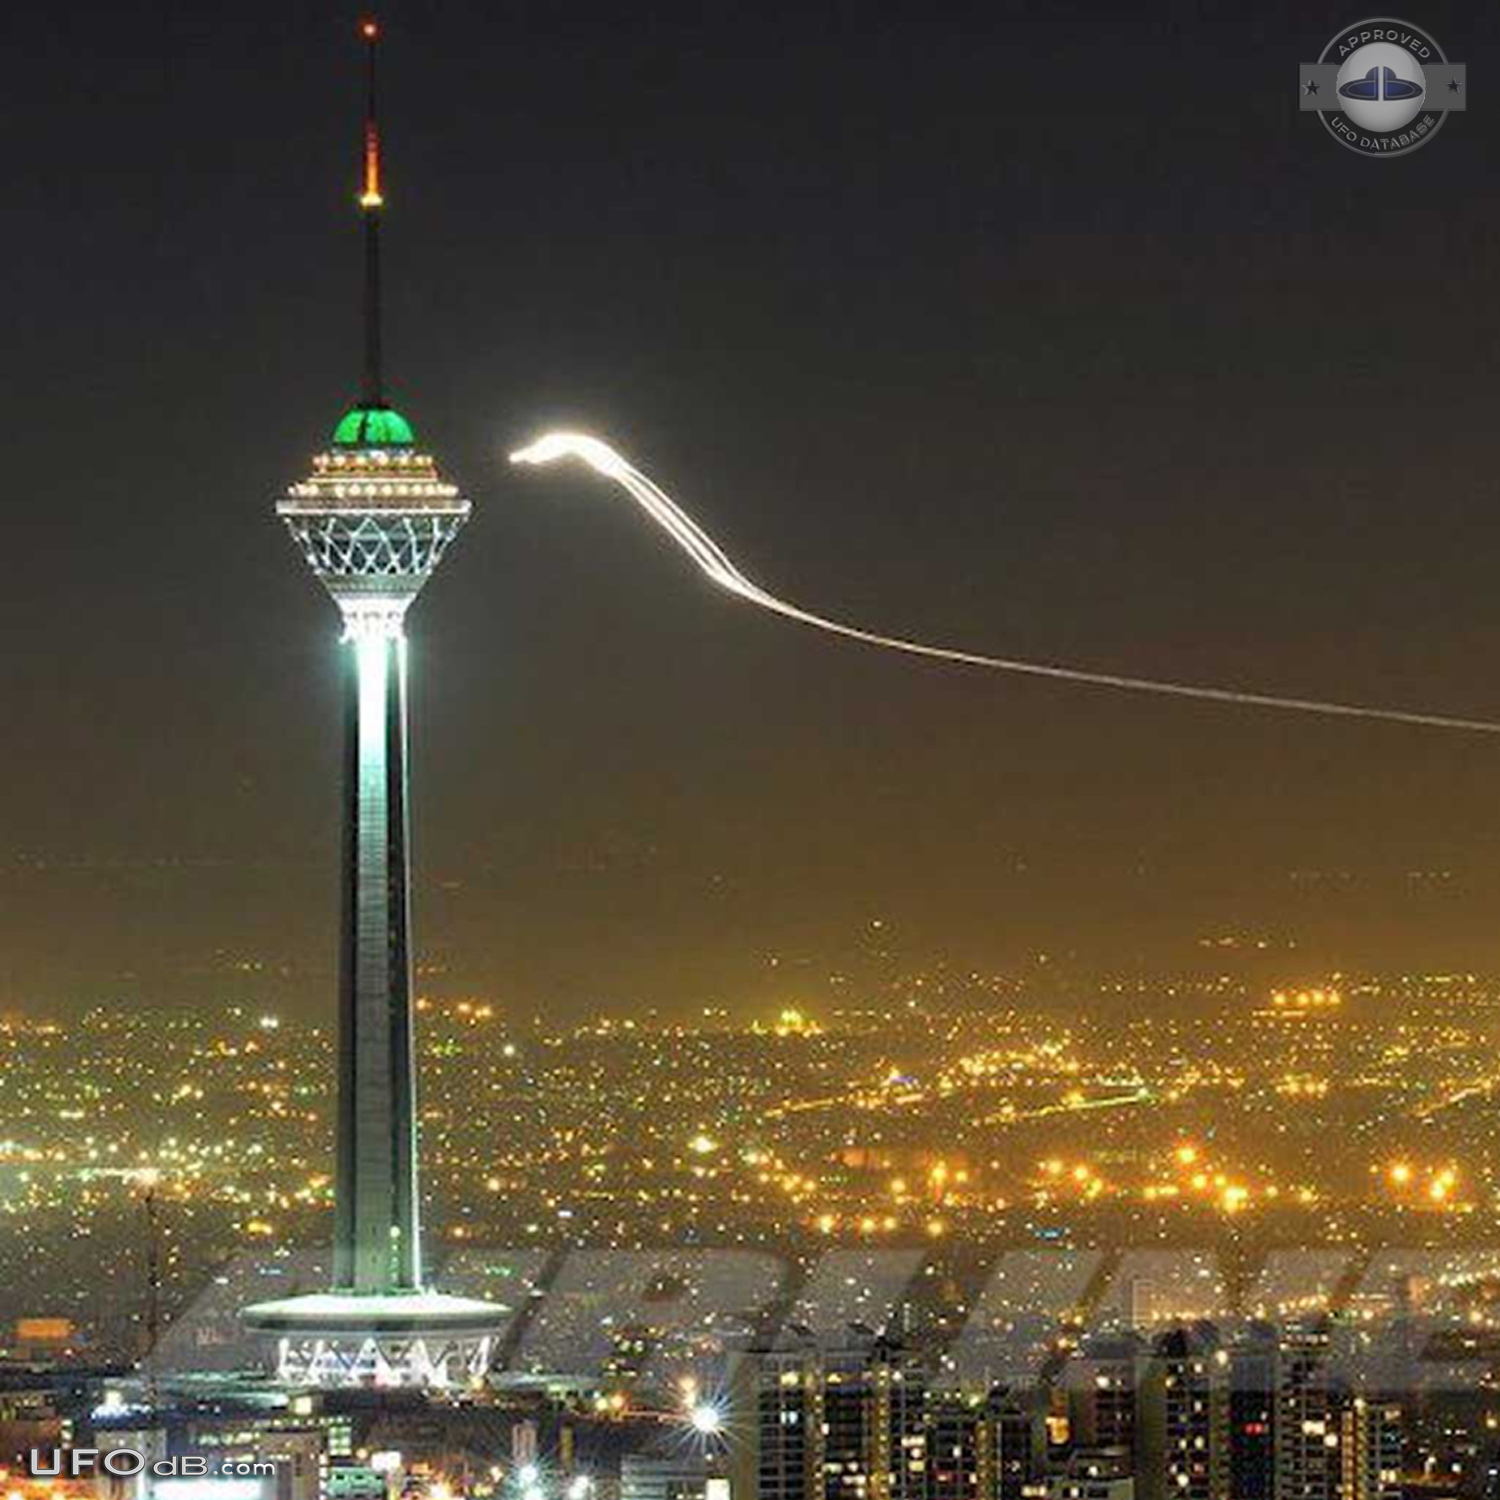 Glowing UFO with long trail near Milad Tower, Tehran, Iran 2012 UFO Picture #437-3